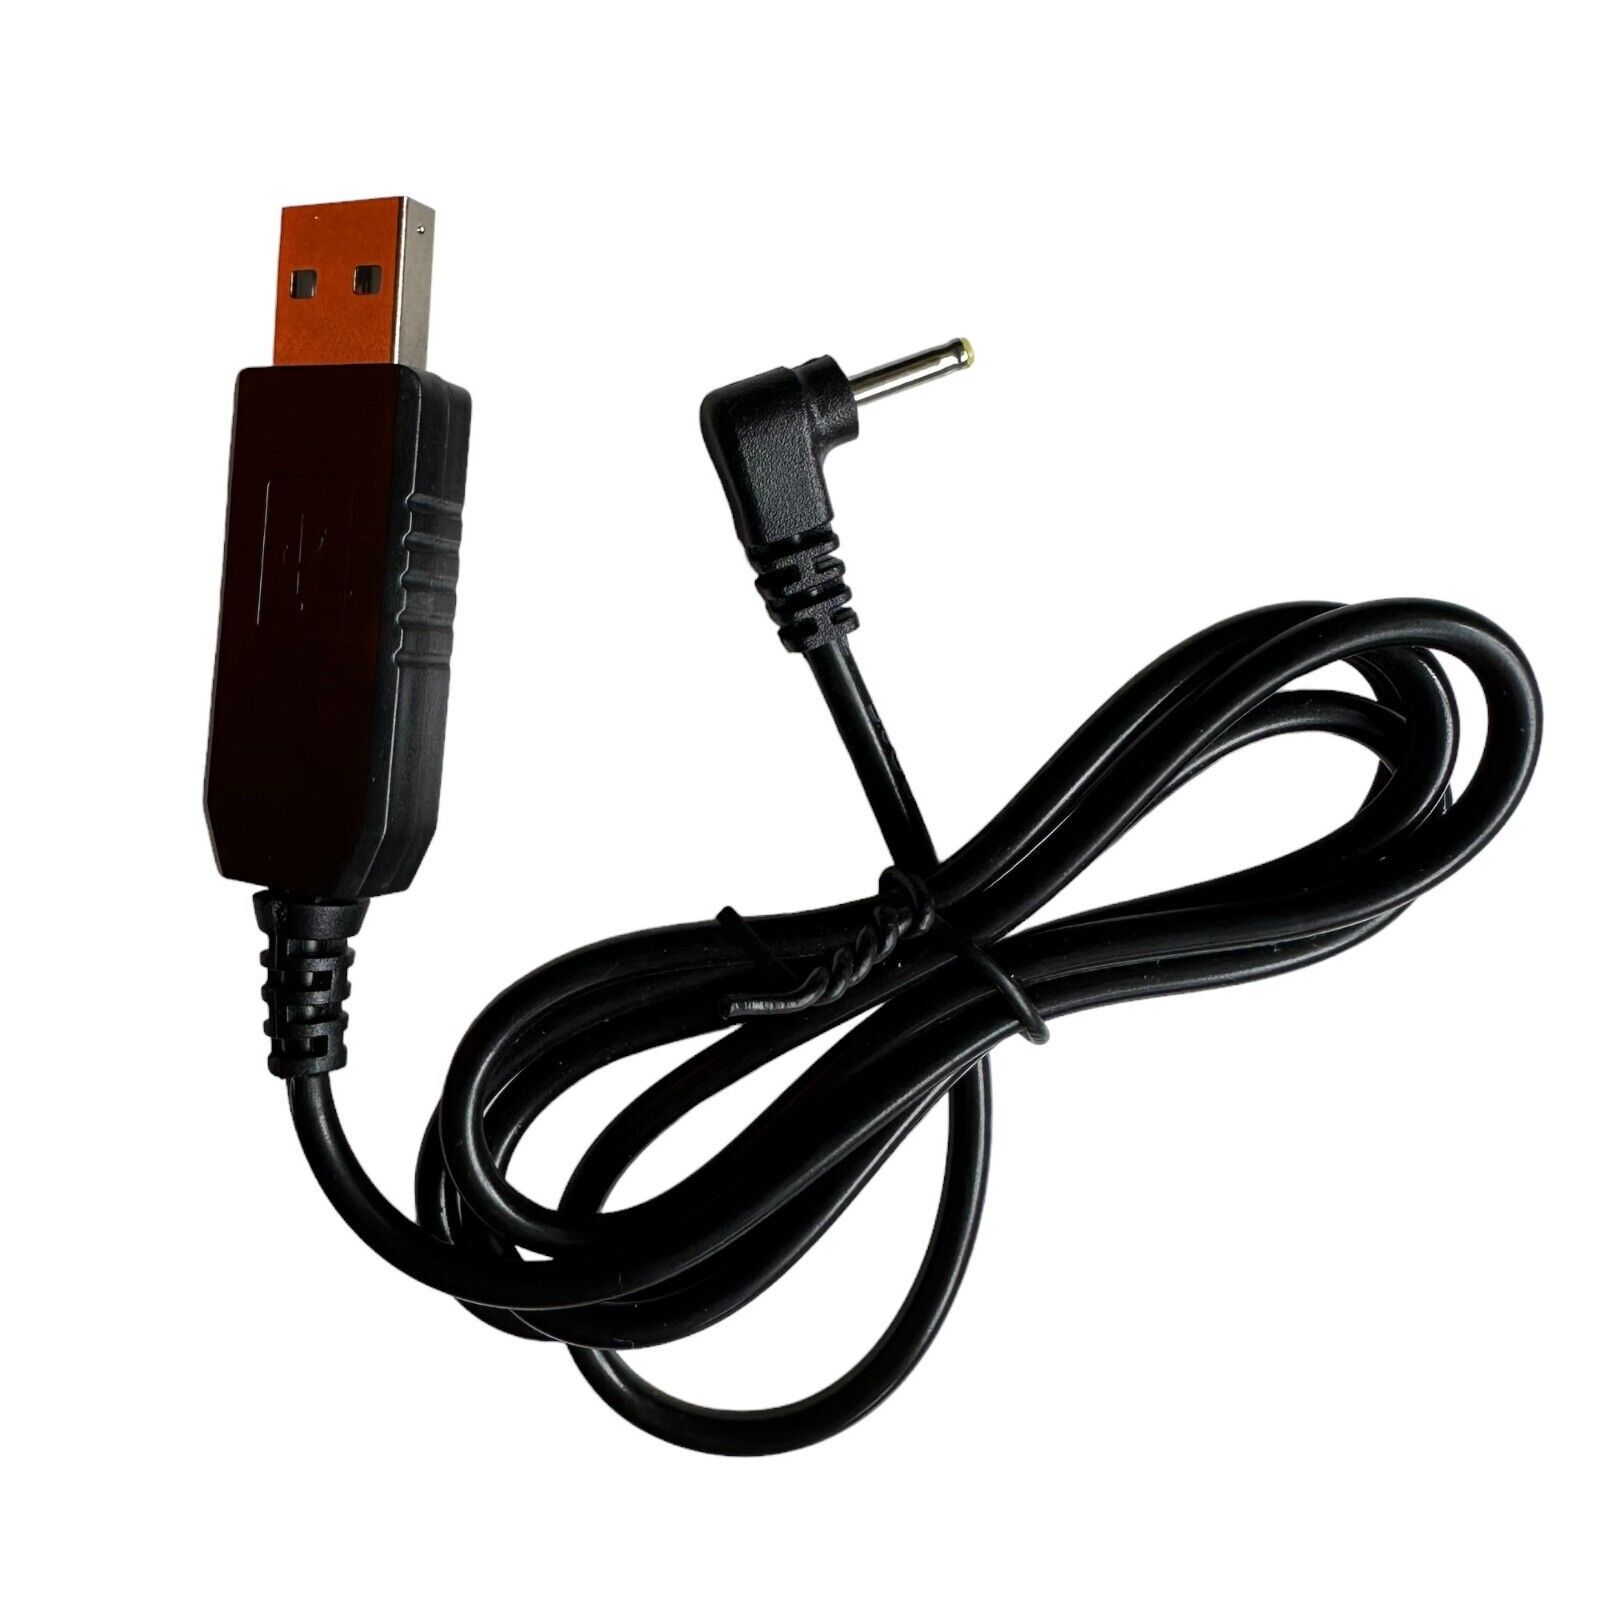 1.5V USB charger cable For Sony WM-EX811 FX521 FX522 FX675 FX700 FX877 FX888 - $13.85